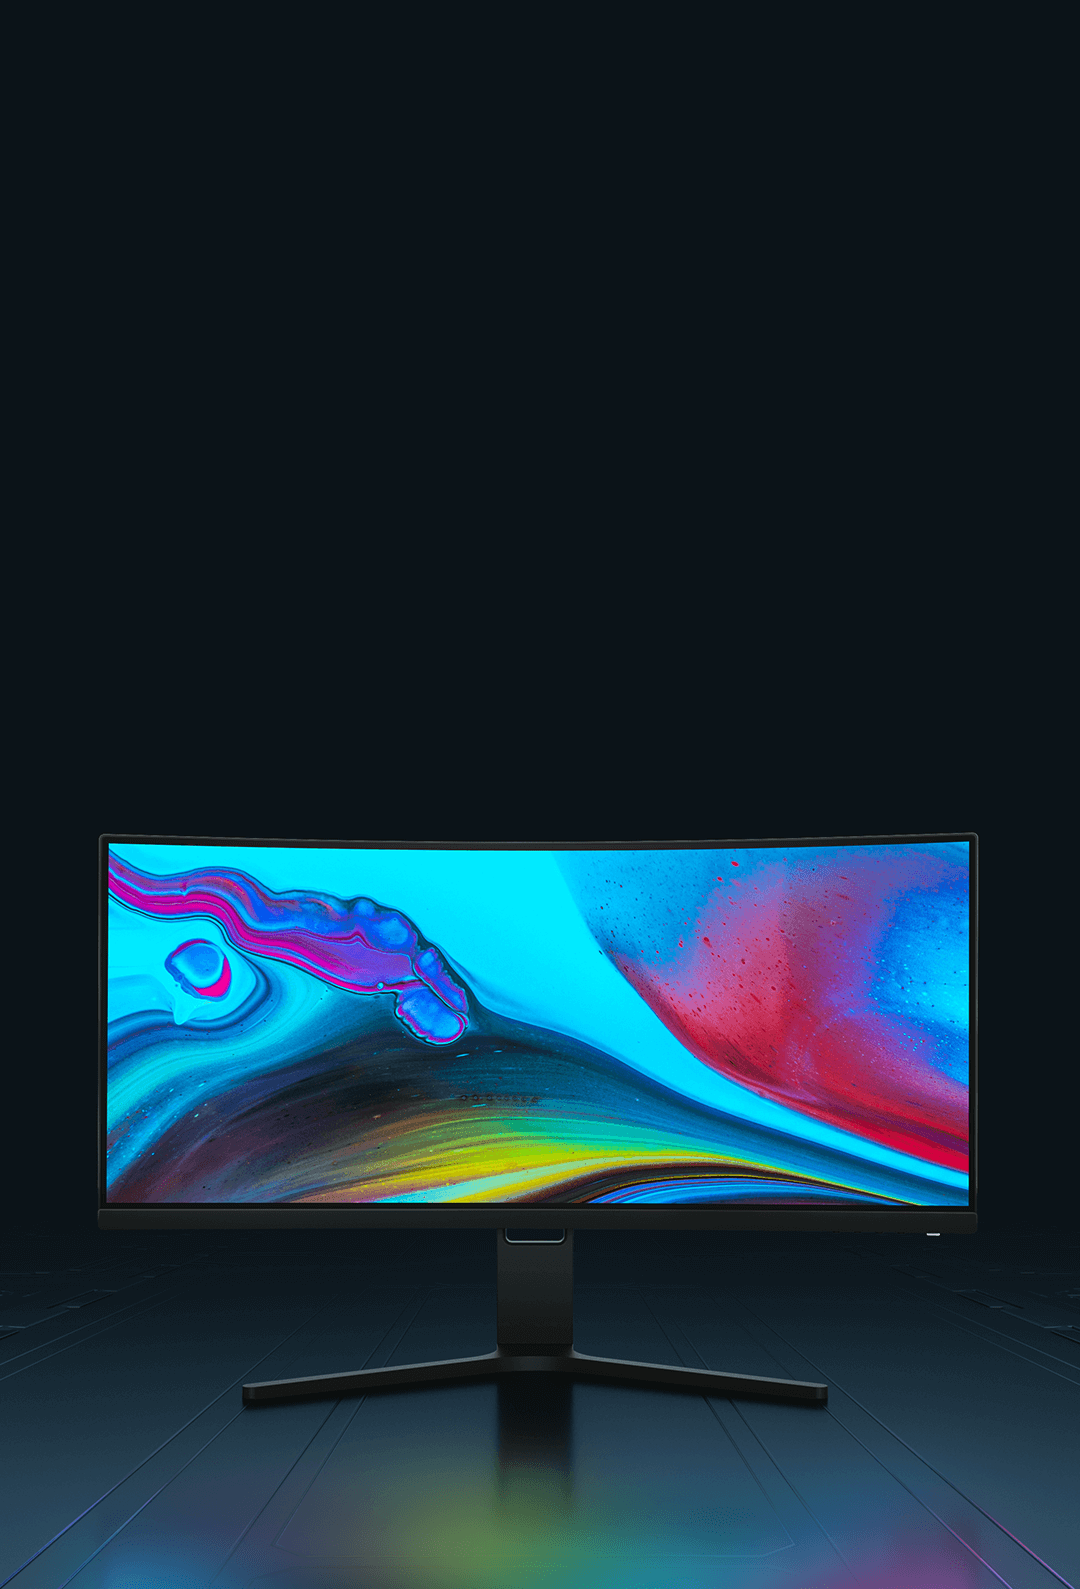 xiaomi-curved-gaming-monitor-30 - Xiaomi France